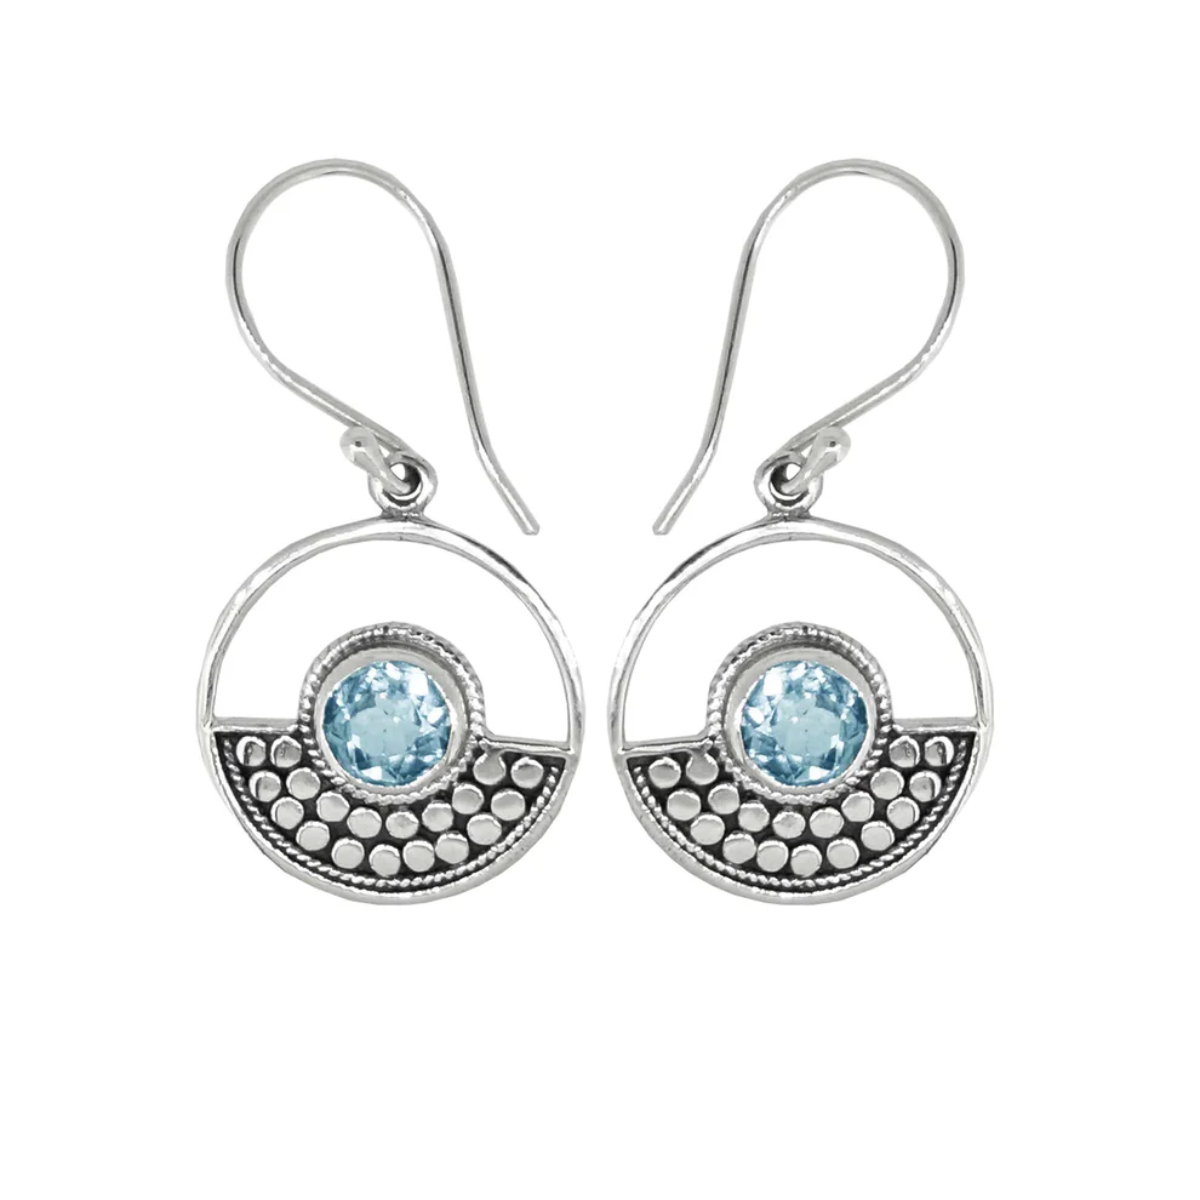 Sterling Silver design in a circle surrounds a circular blue topaz stone on ear wires. Half of the circle is dotted with an oxidized sterling design, the other half is open.